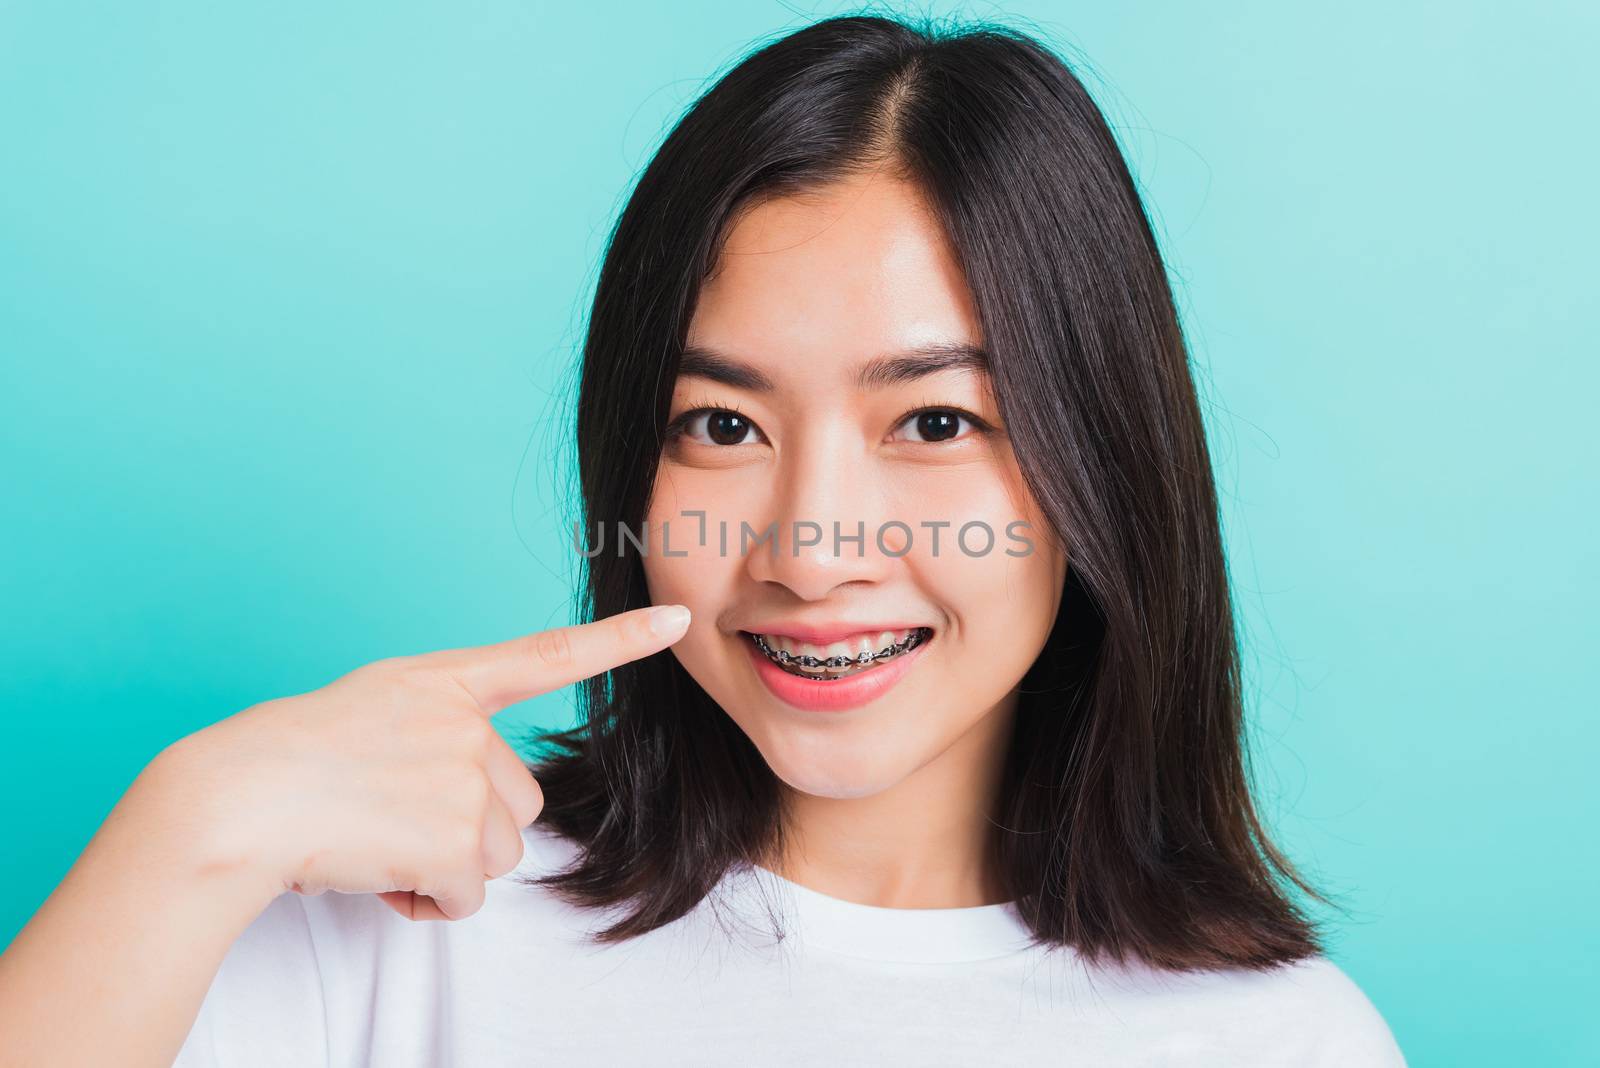 woman smile have dental braces on teeth laughing point finger he by Sorapop